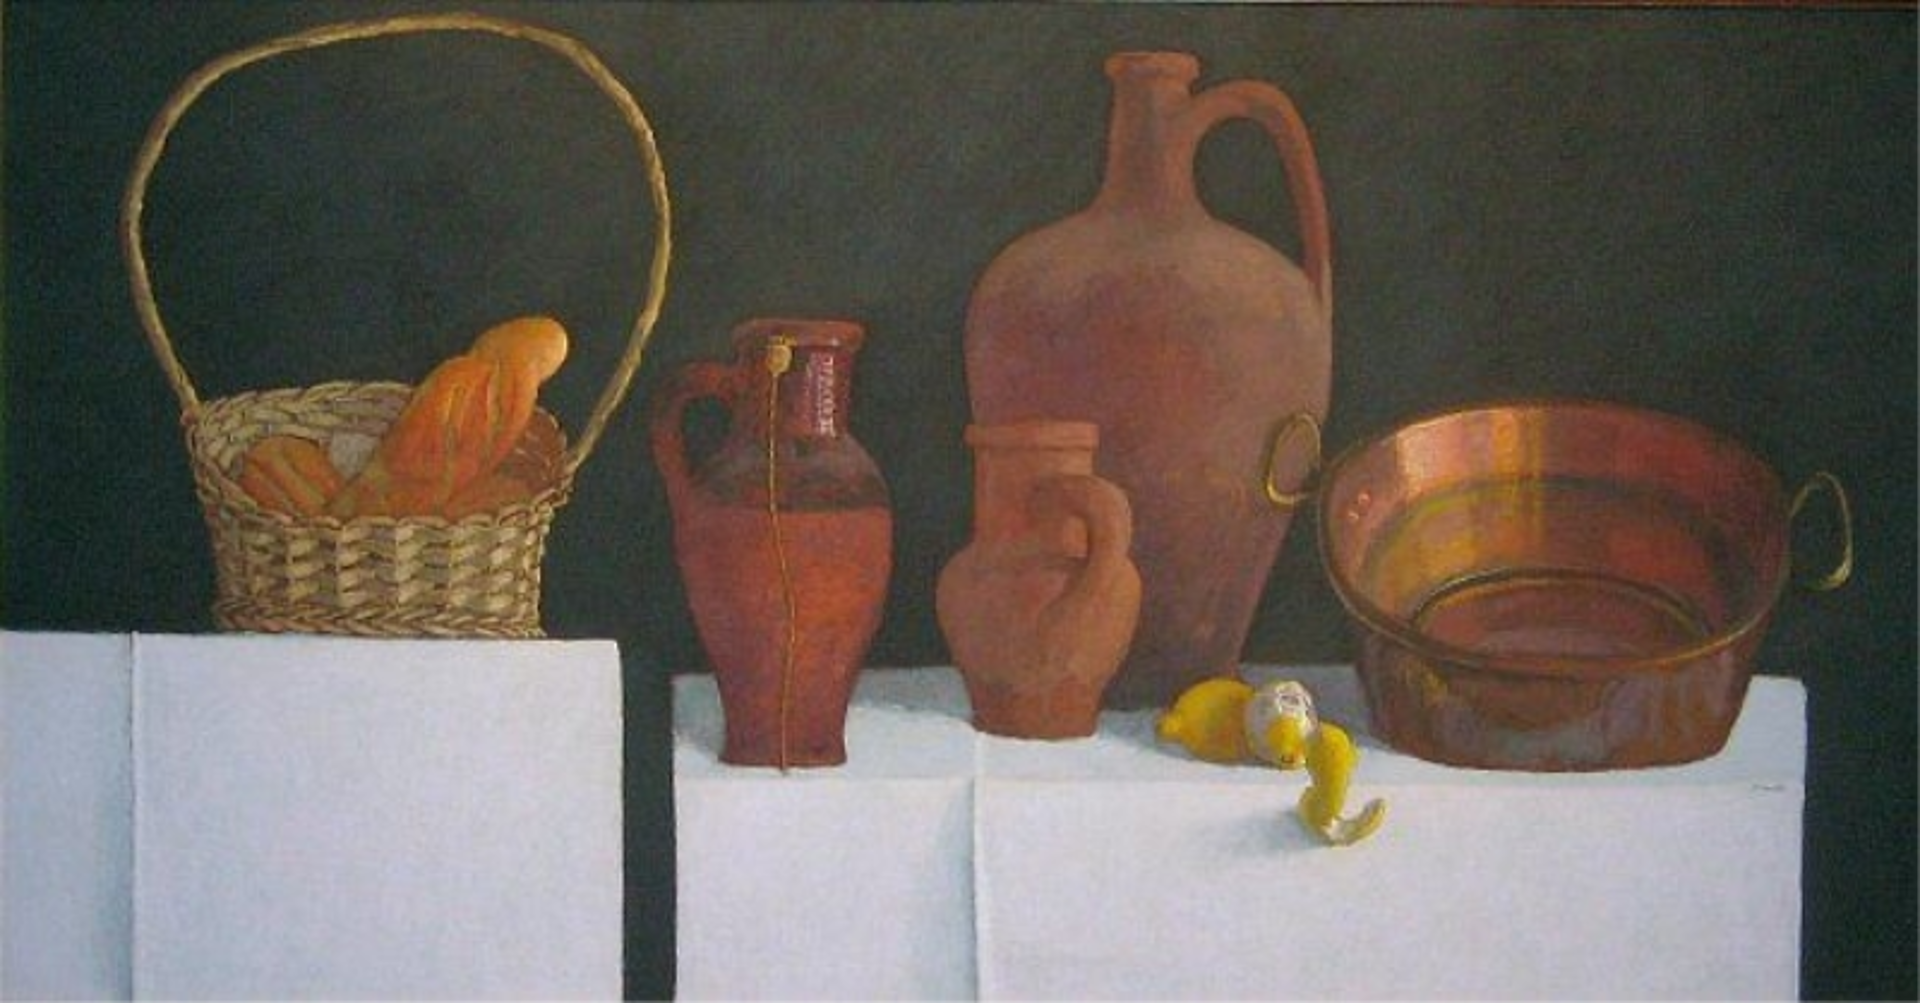 A still life paintings showing a carefully spaced group of objects, from left to right, a wicker basked with loaves of French bread, three earthenware vessels of different sizes, a partially pealed lemon, and a copper basin